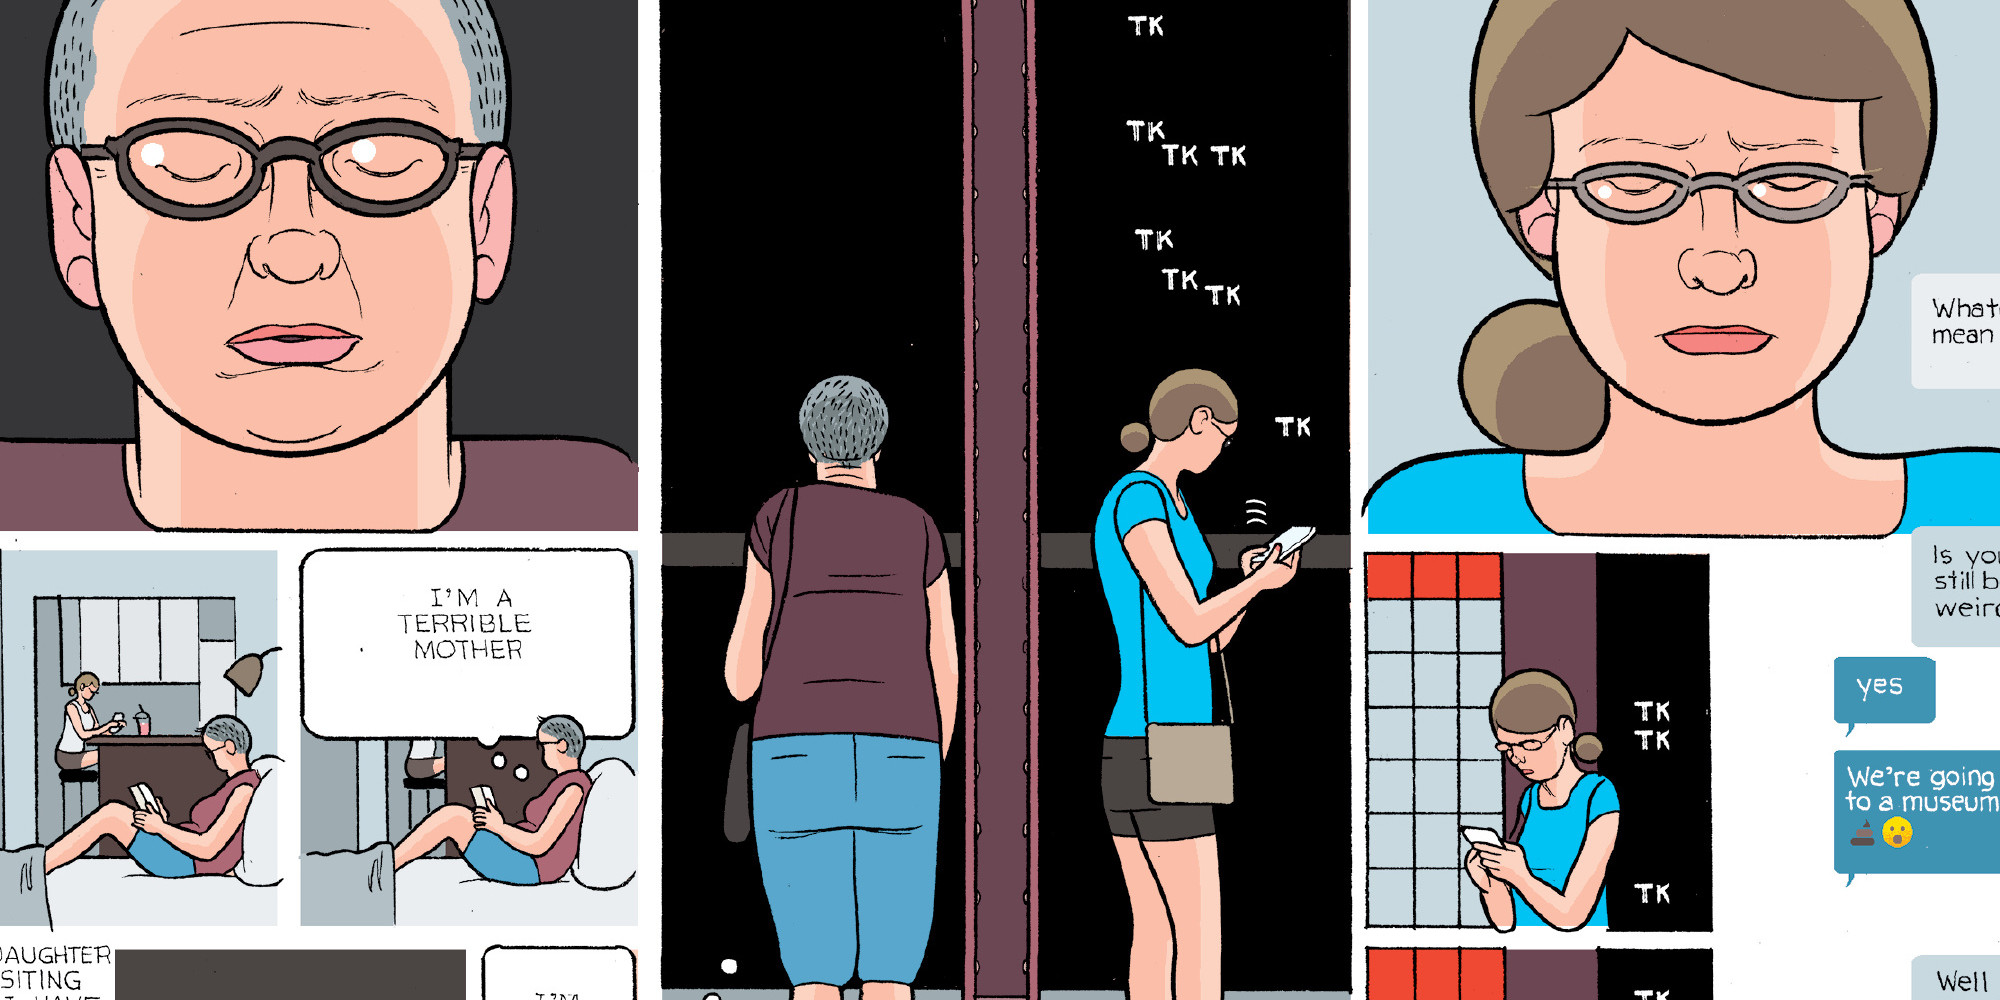 Illustration by Chris Ware